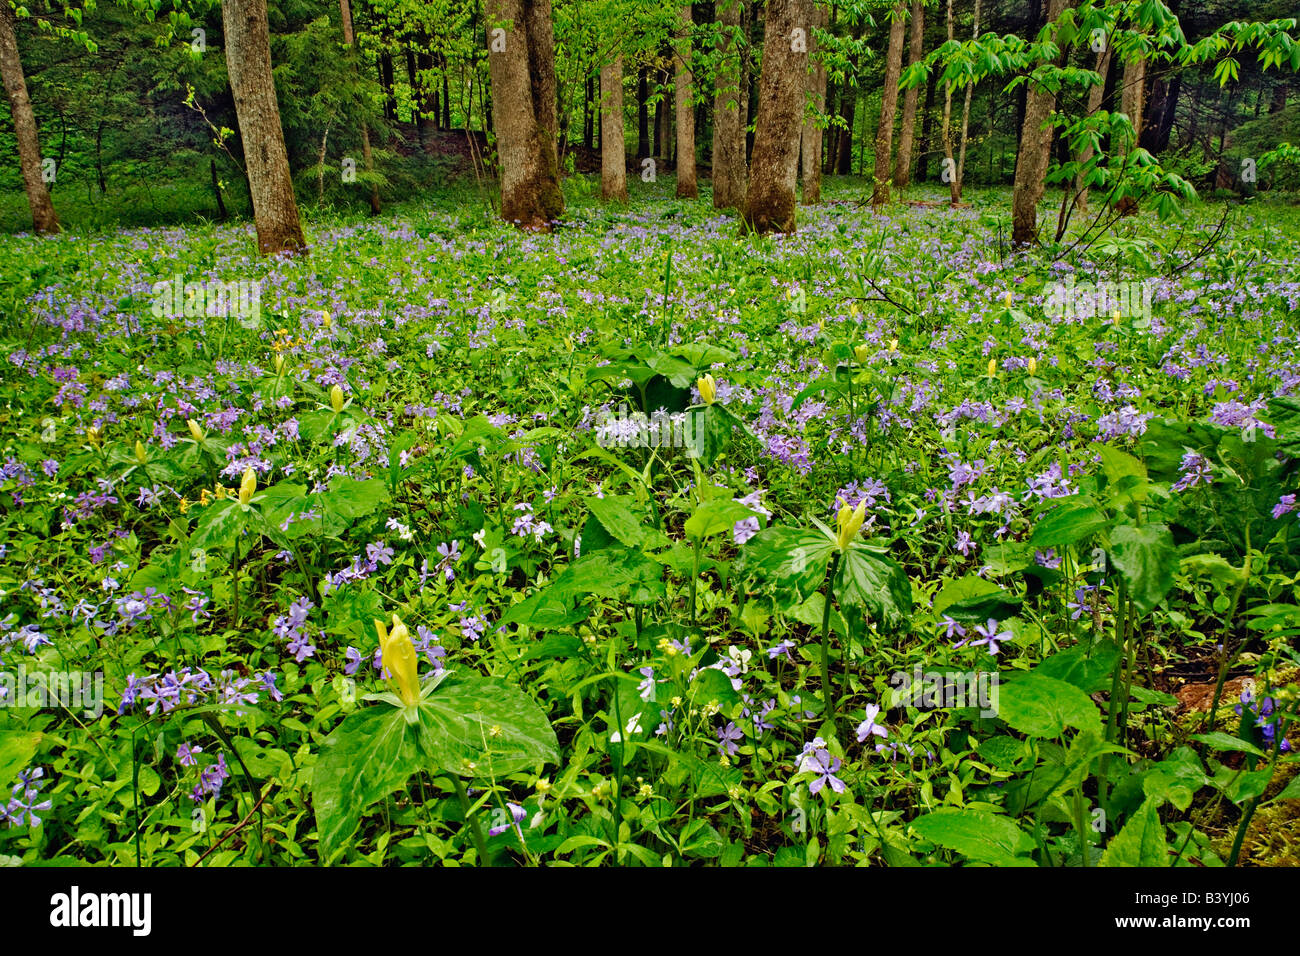 Meadow of Blue Phlox and Yellow Trillium on forest floor at White Oak Sinks, Great Smoky Mountains National Park, Tennessee Stock Photo